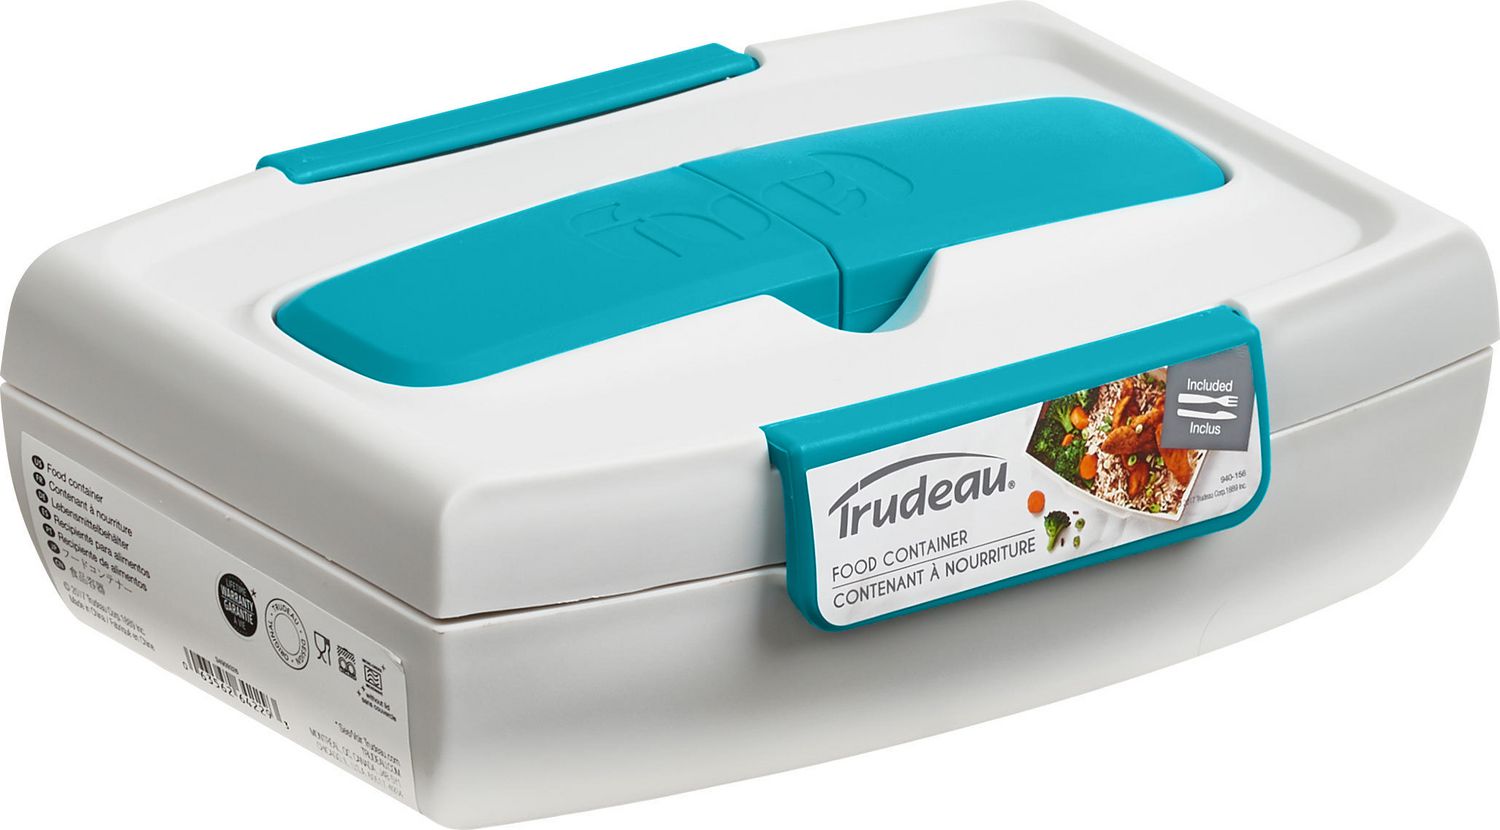 Trudeau Fuel Food Container Utensils And Thermos To Go Travel Food